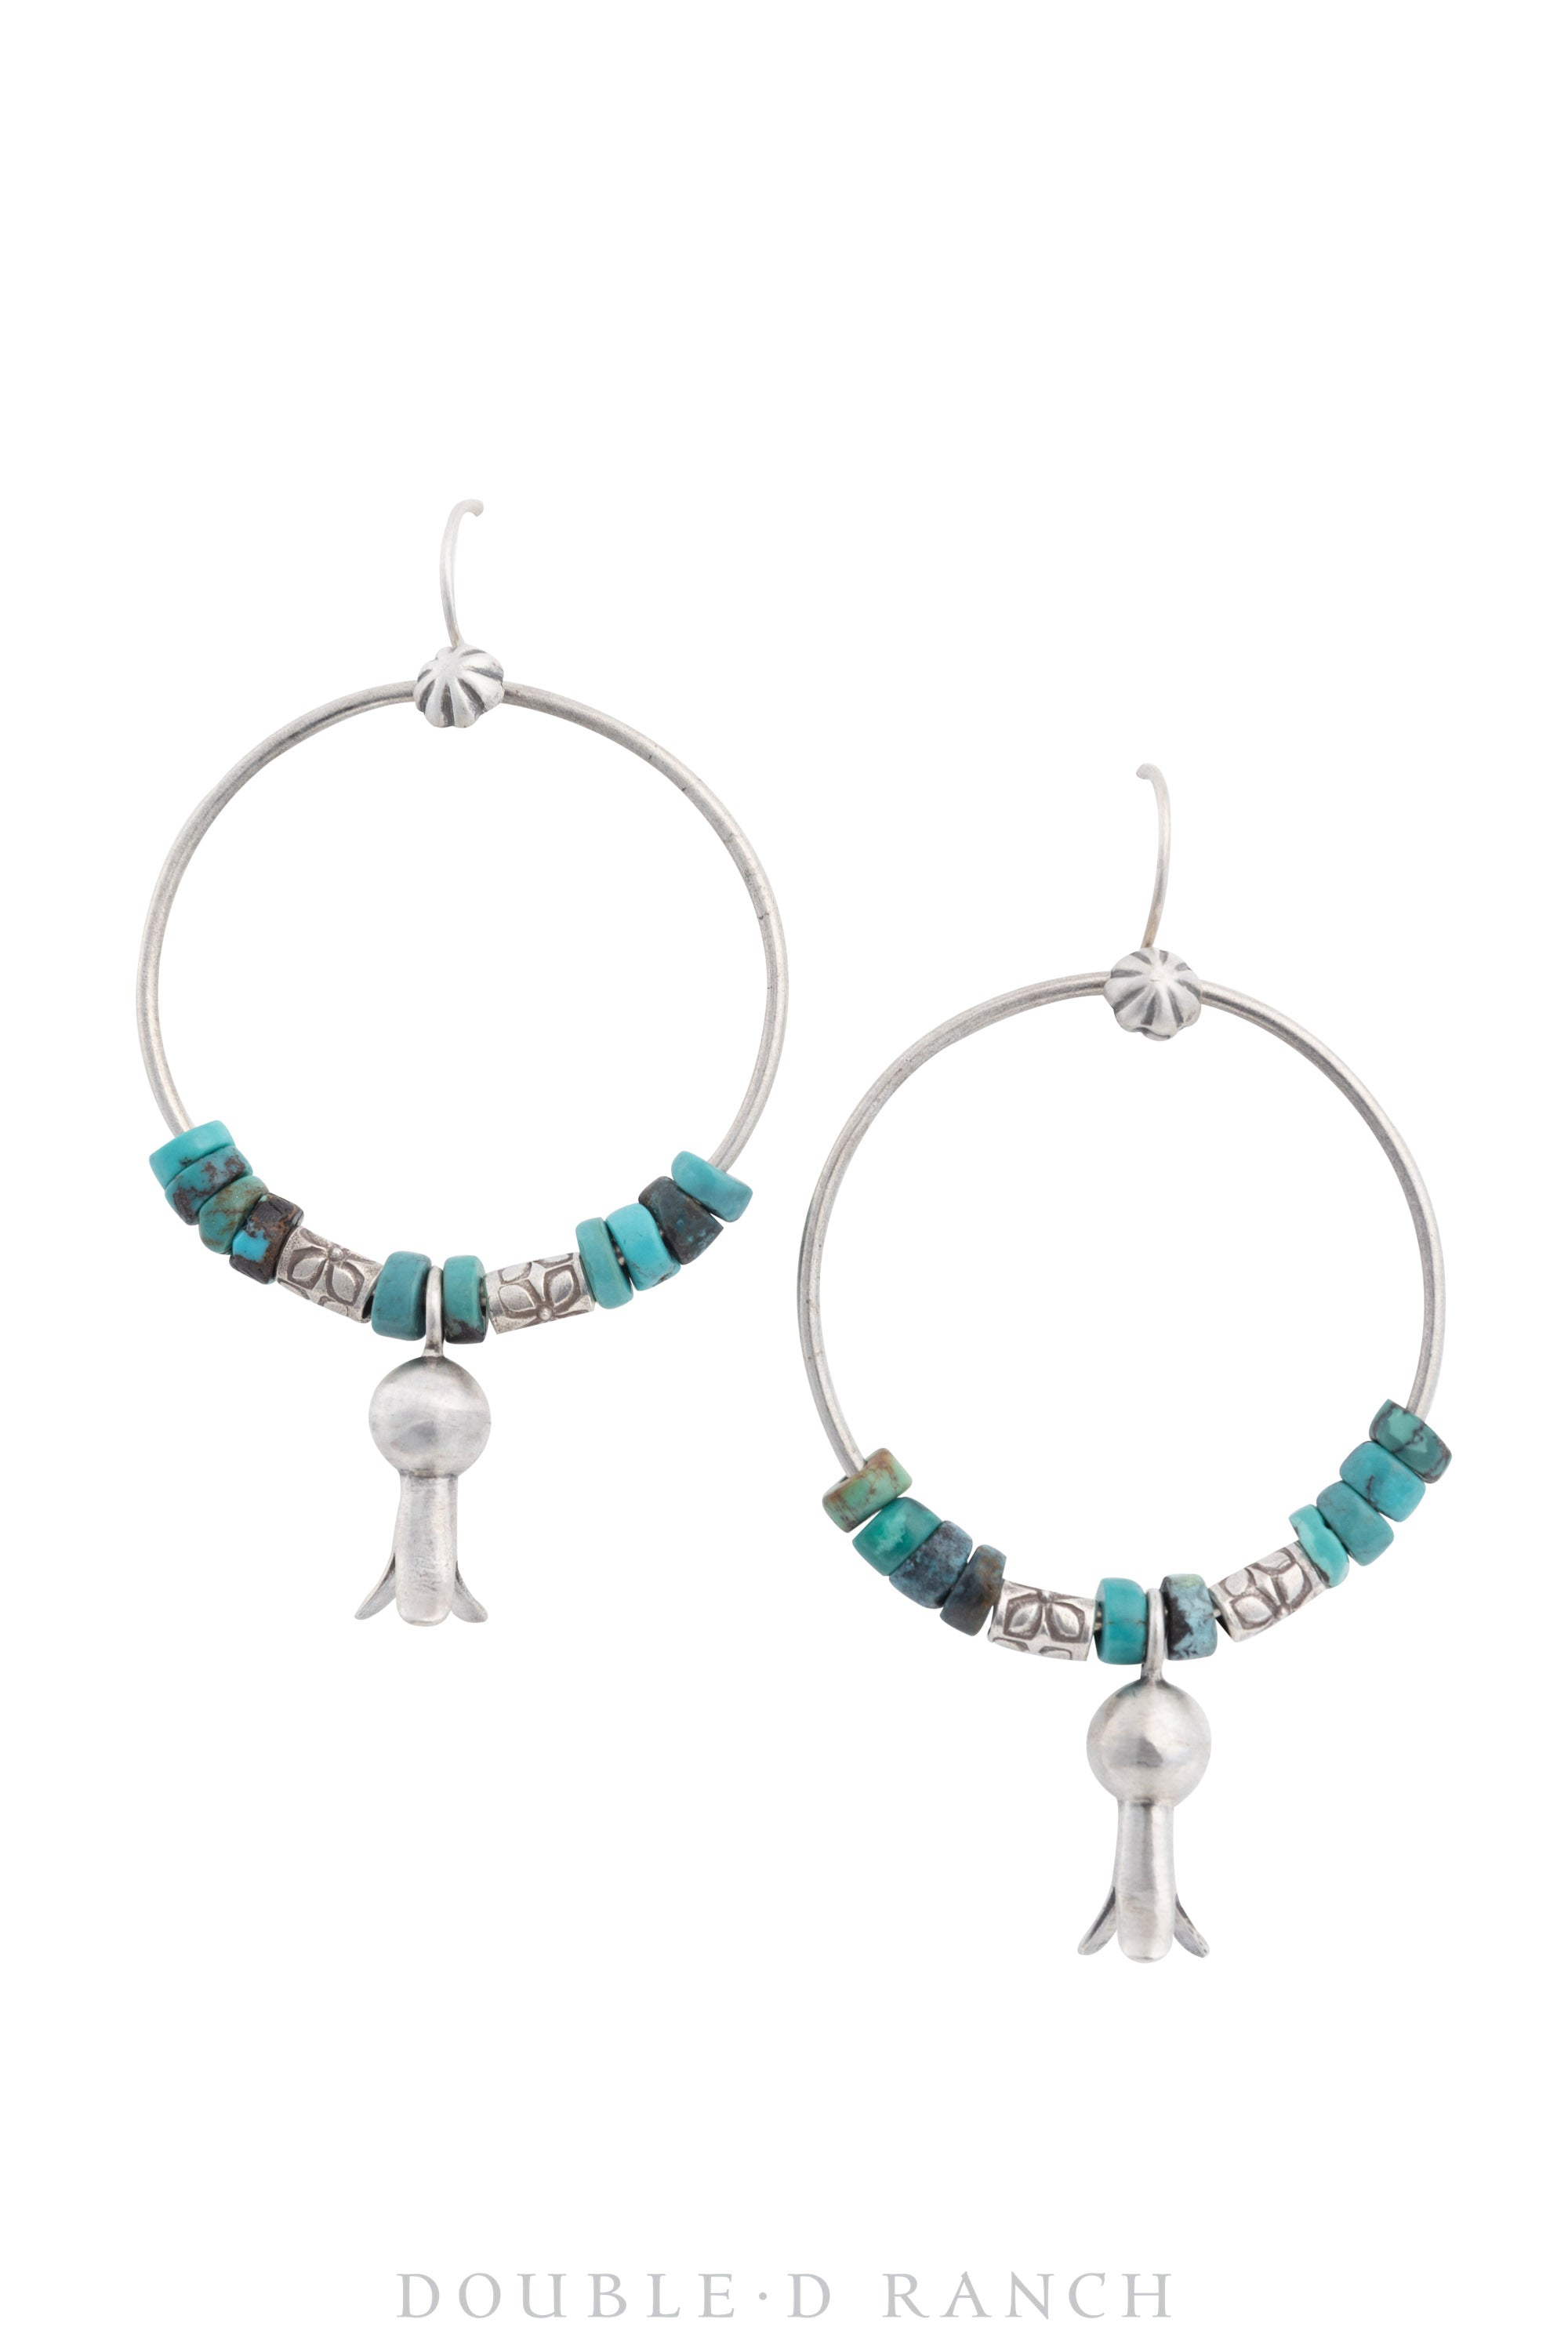 Earrings, Hoop, Turquoise, Sterling Silver, Contemporary, 1468